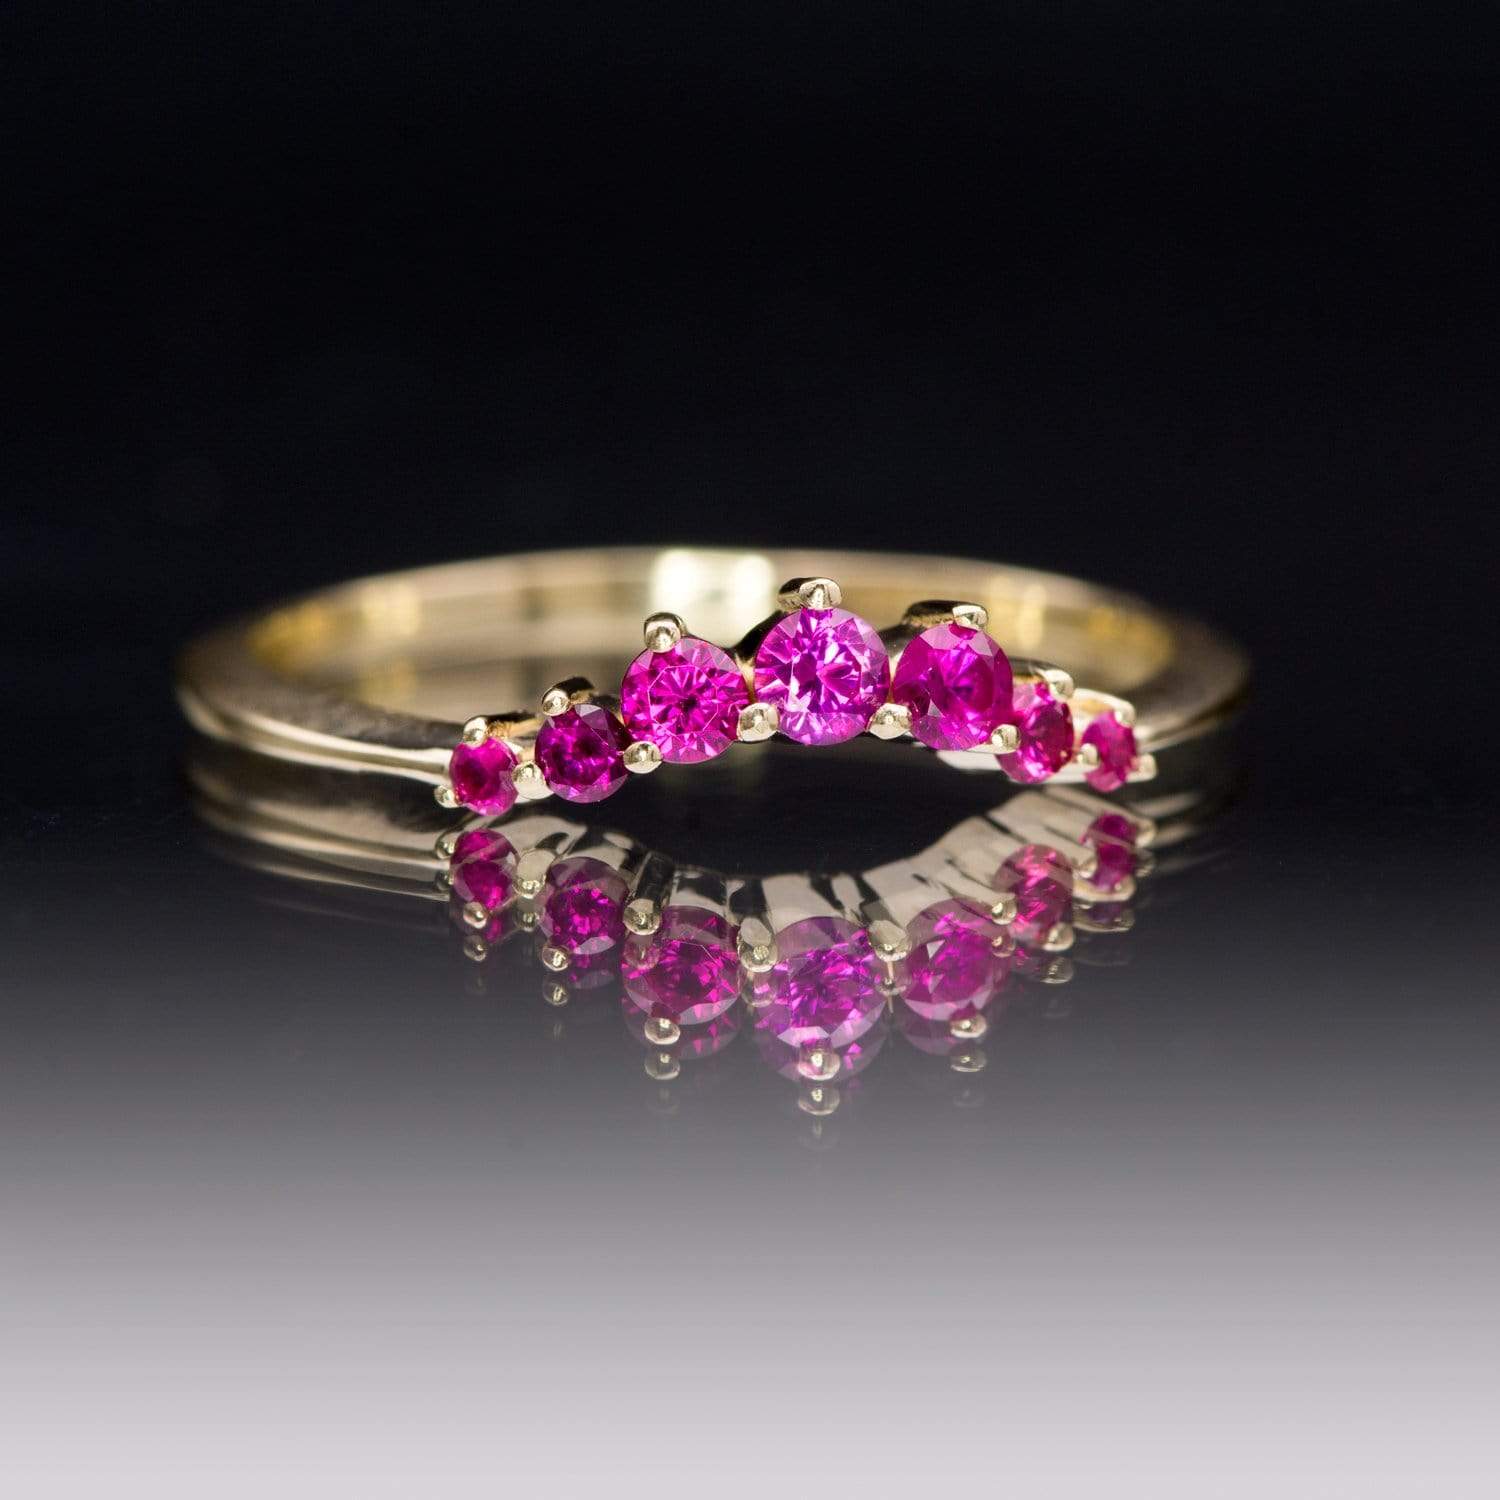 Corinne - Curved Contoured Wedding Ring With Rubies 18k Yellow Gold Ring by Nodeform